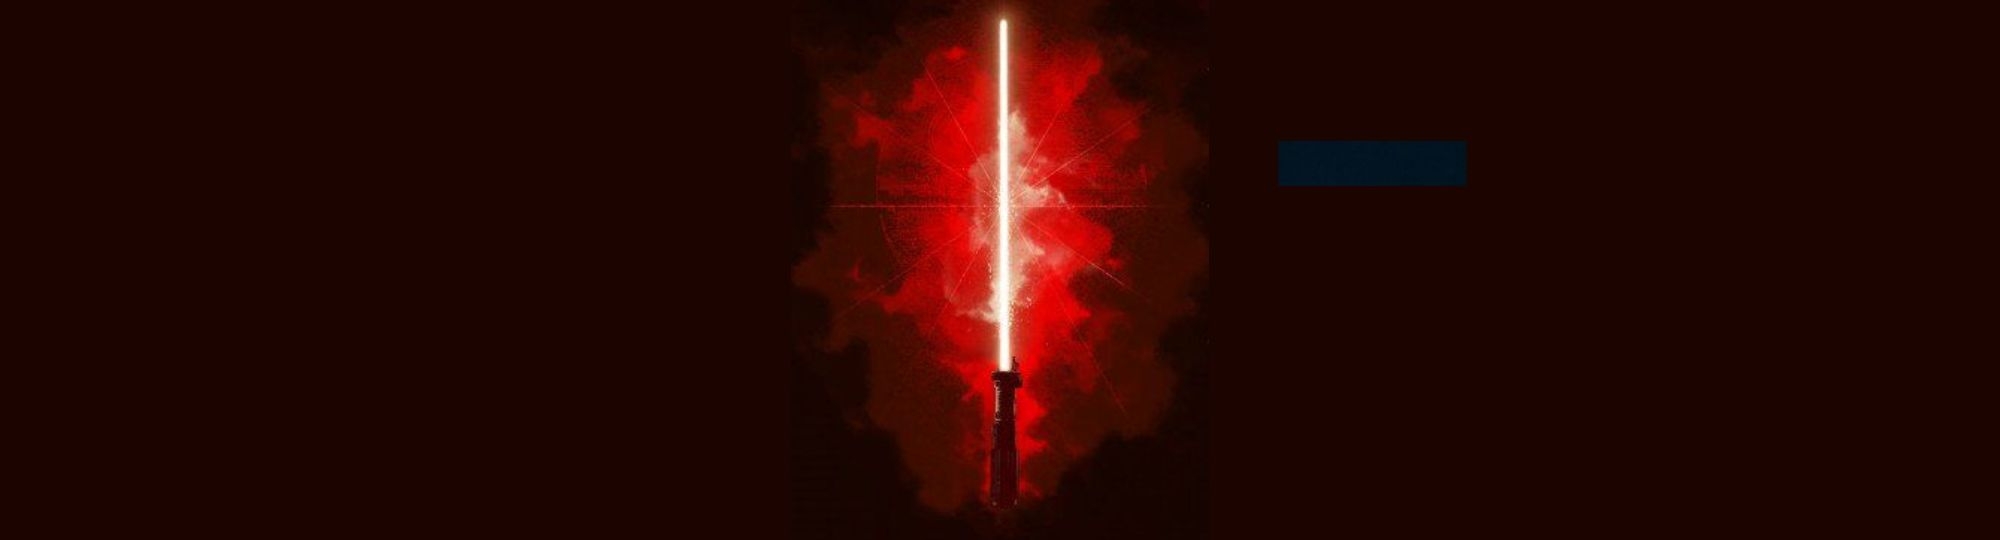 Image of red light saber in the darkness